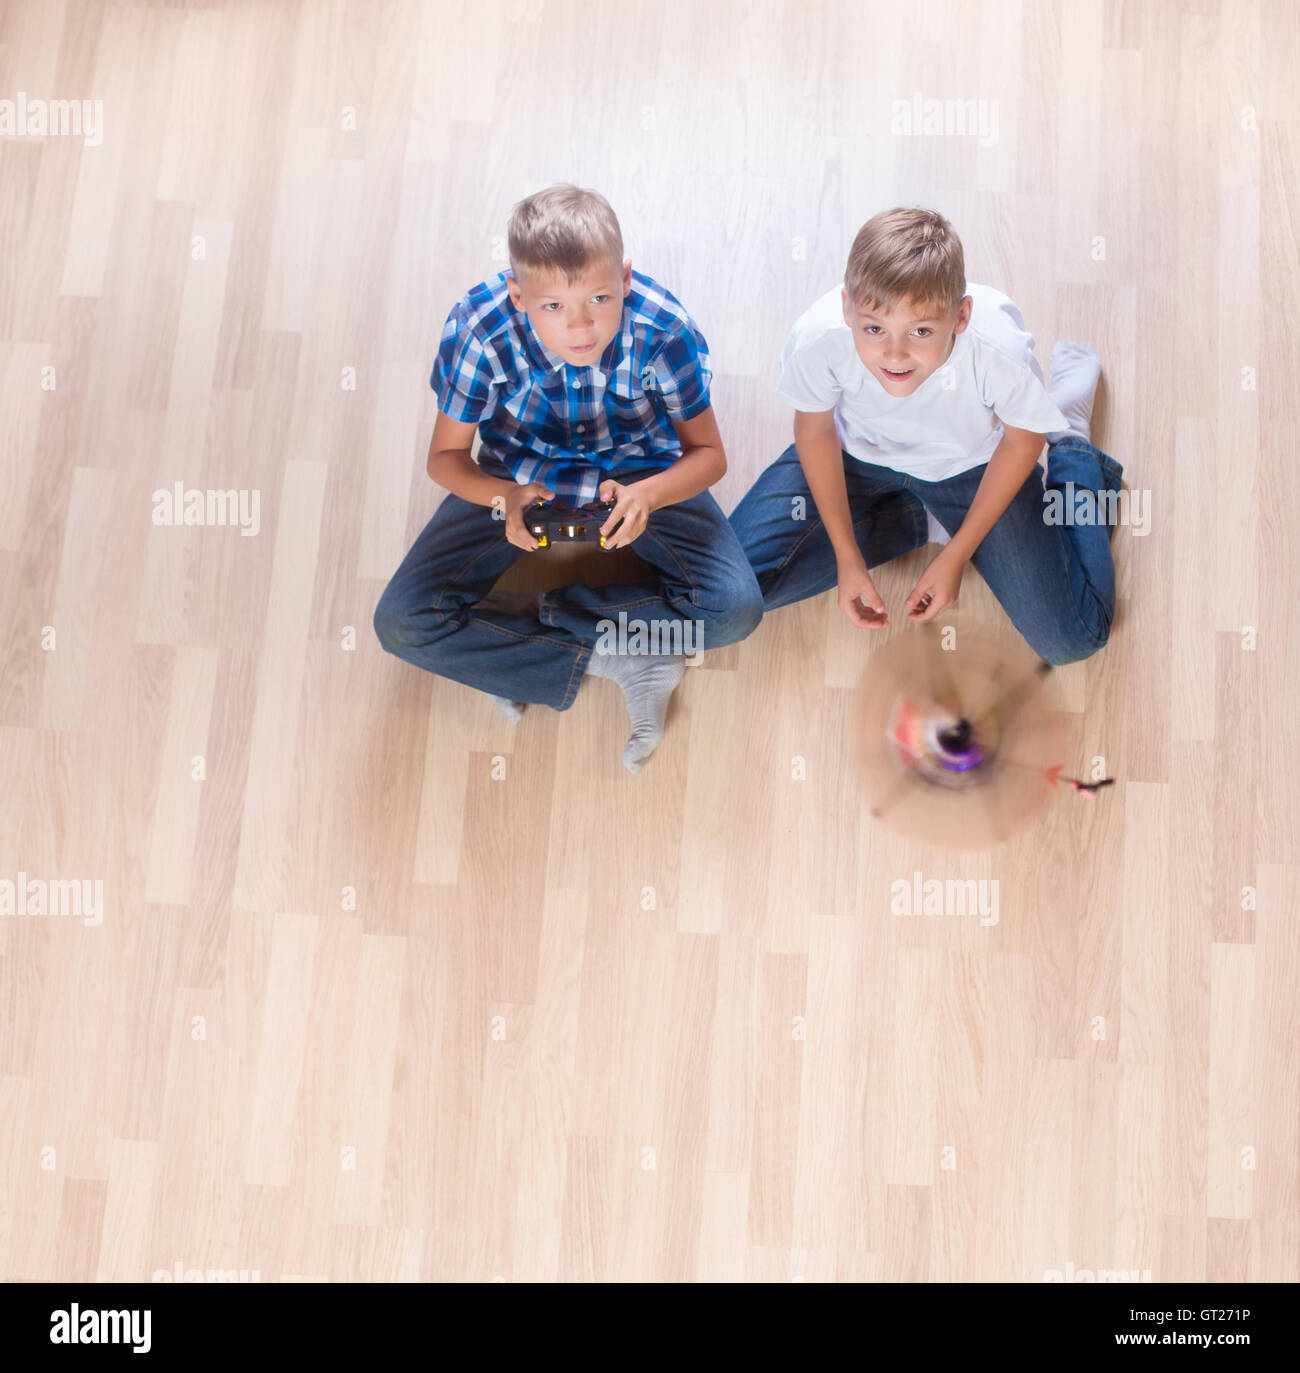 kids playing with flying helicopter model at home using remote control Stock Photo